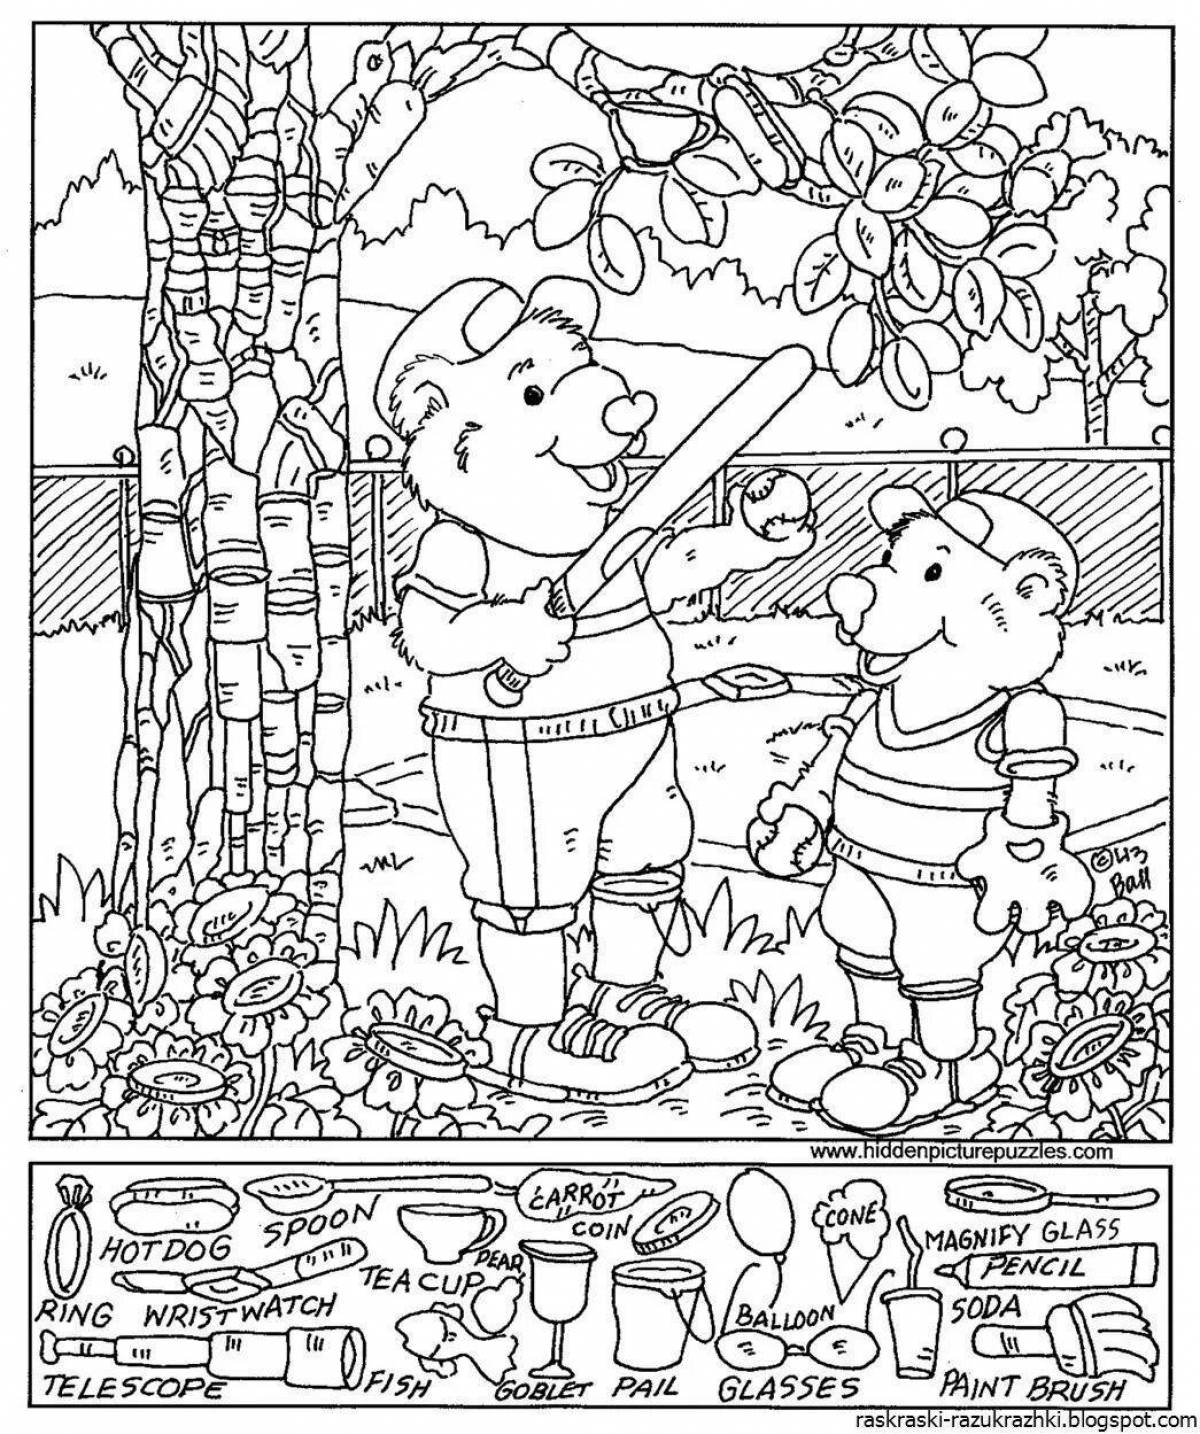 Invigorating coloring for mindfulness